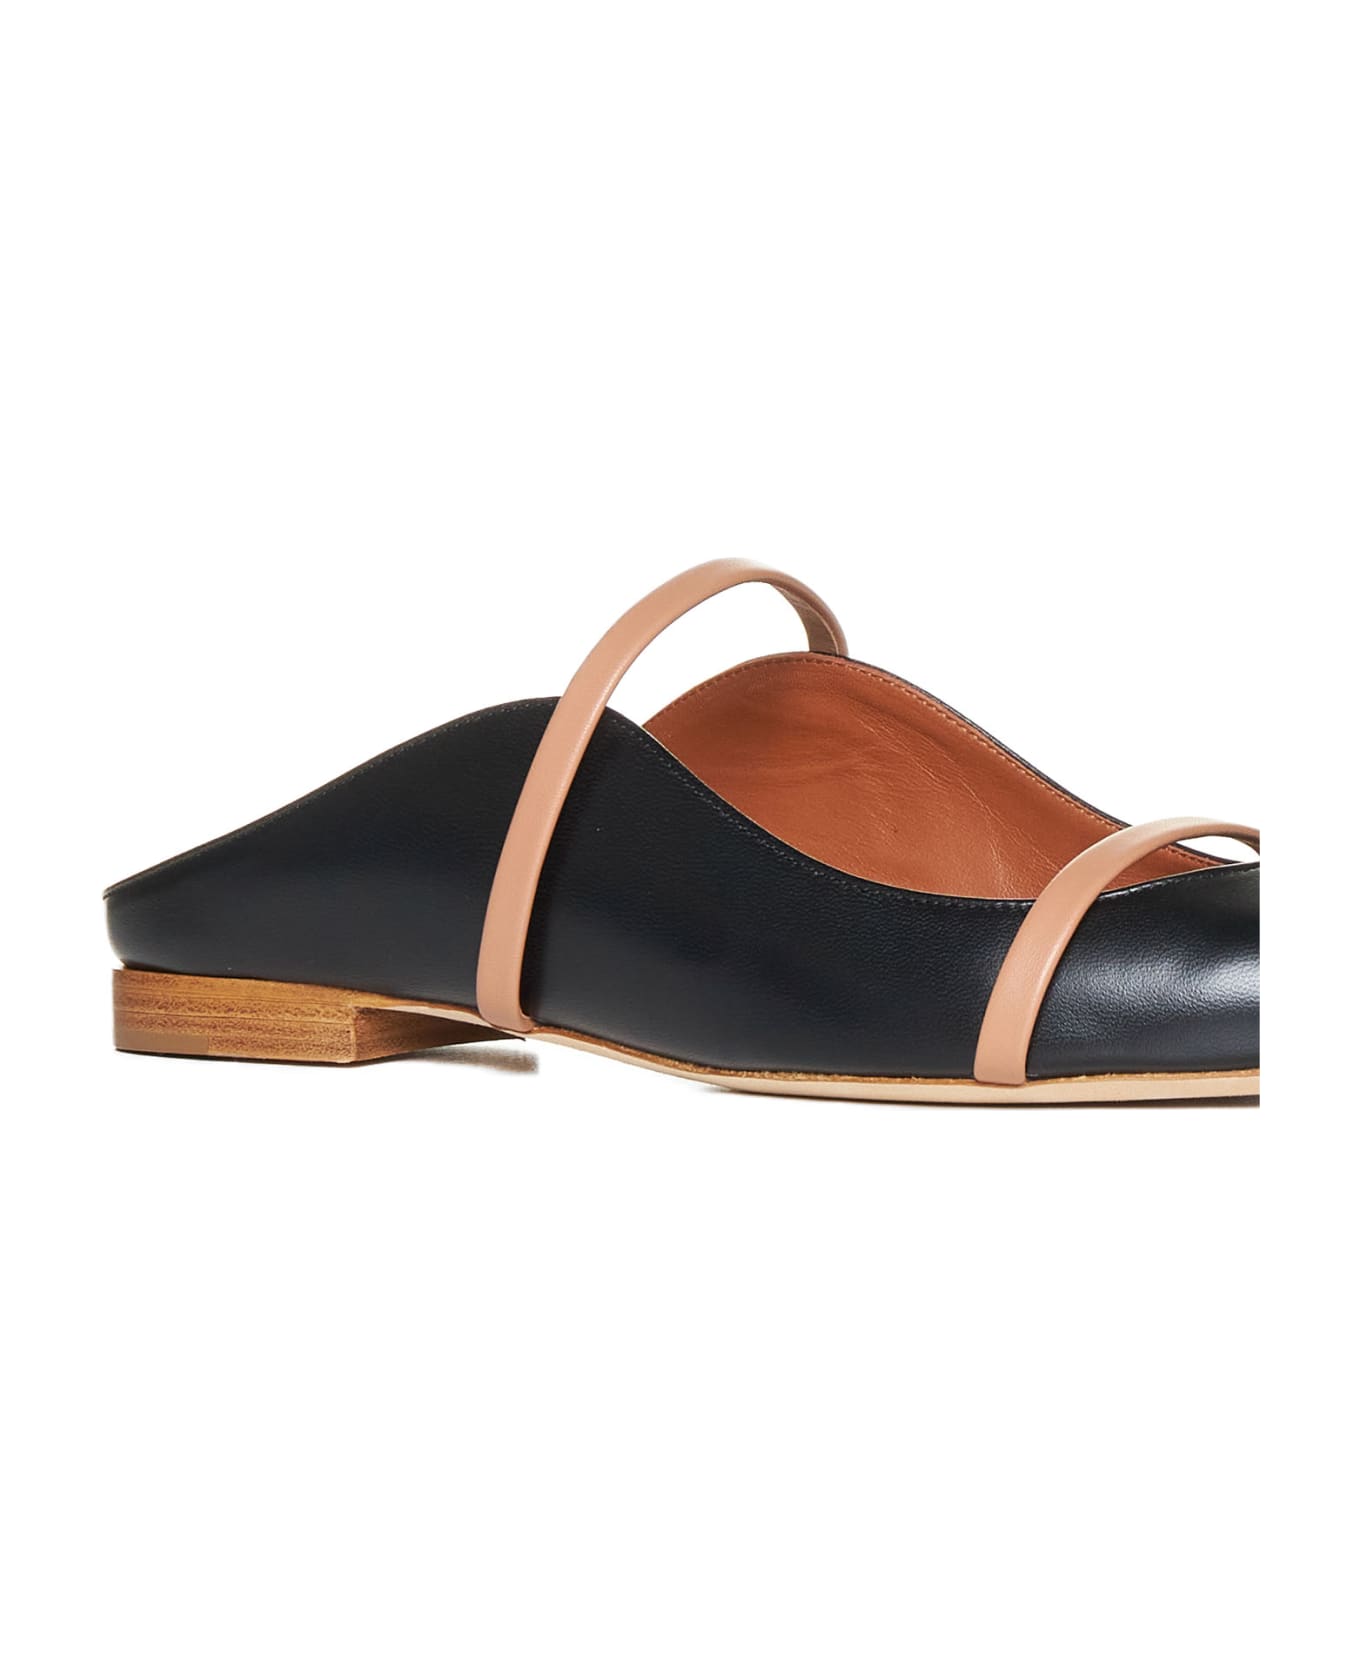 Malone Souliers Sandals - Black nude サンダル